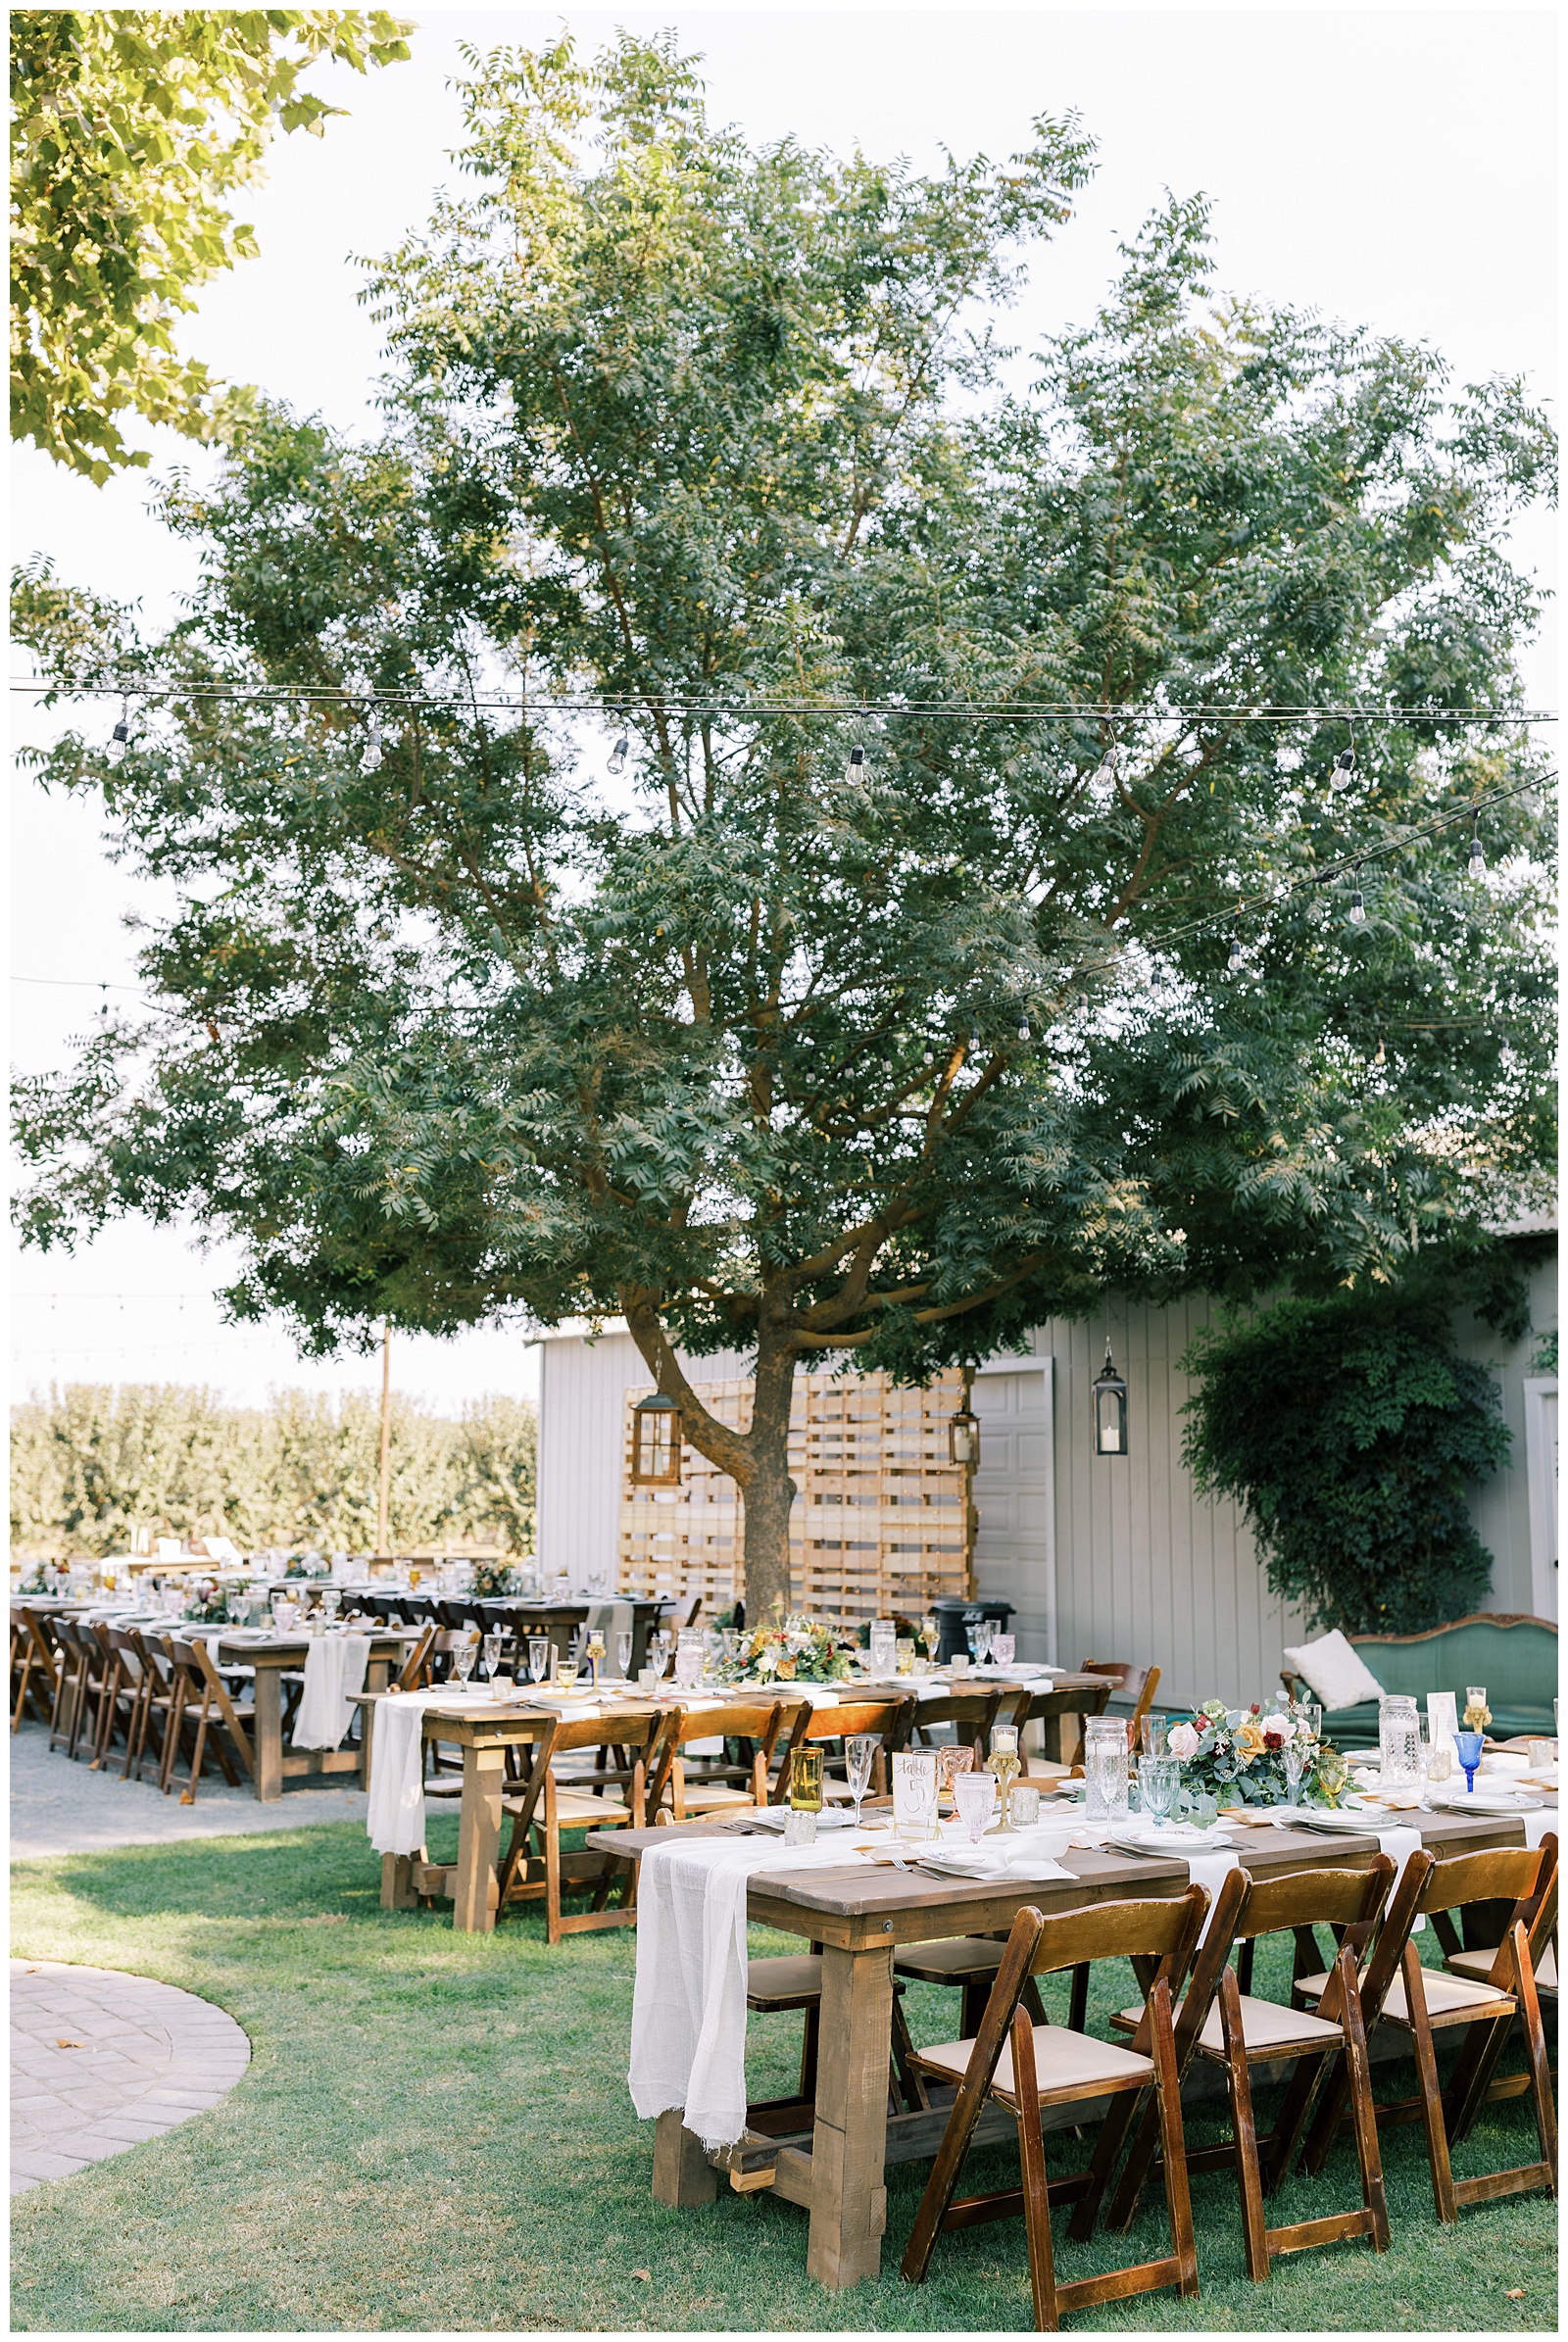 reedley wedding backyard reception decor inspiration farm style tables with vintage plates, mixed drinkware and floral centerpieces